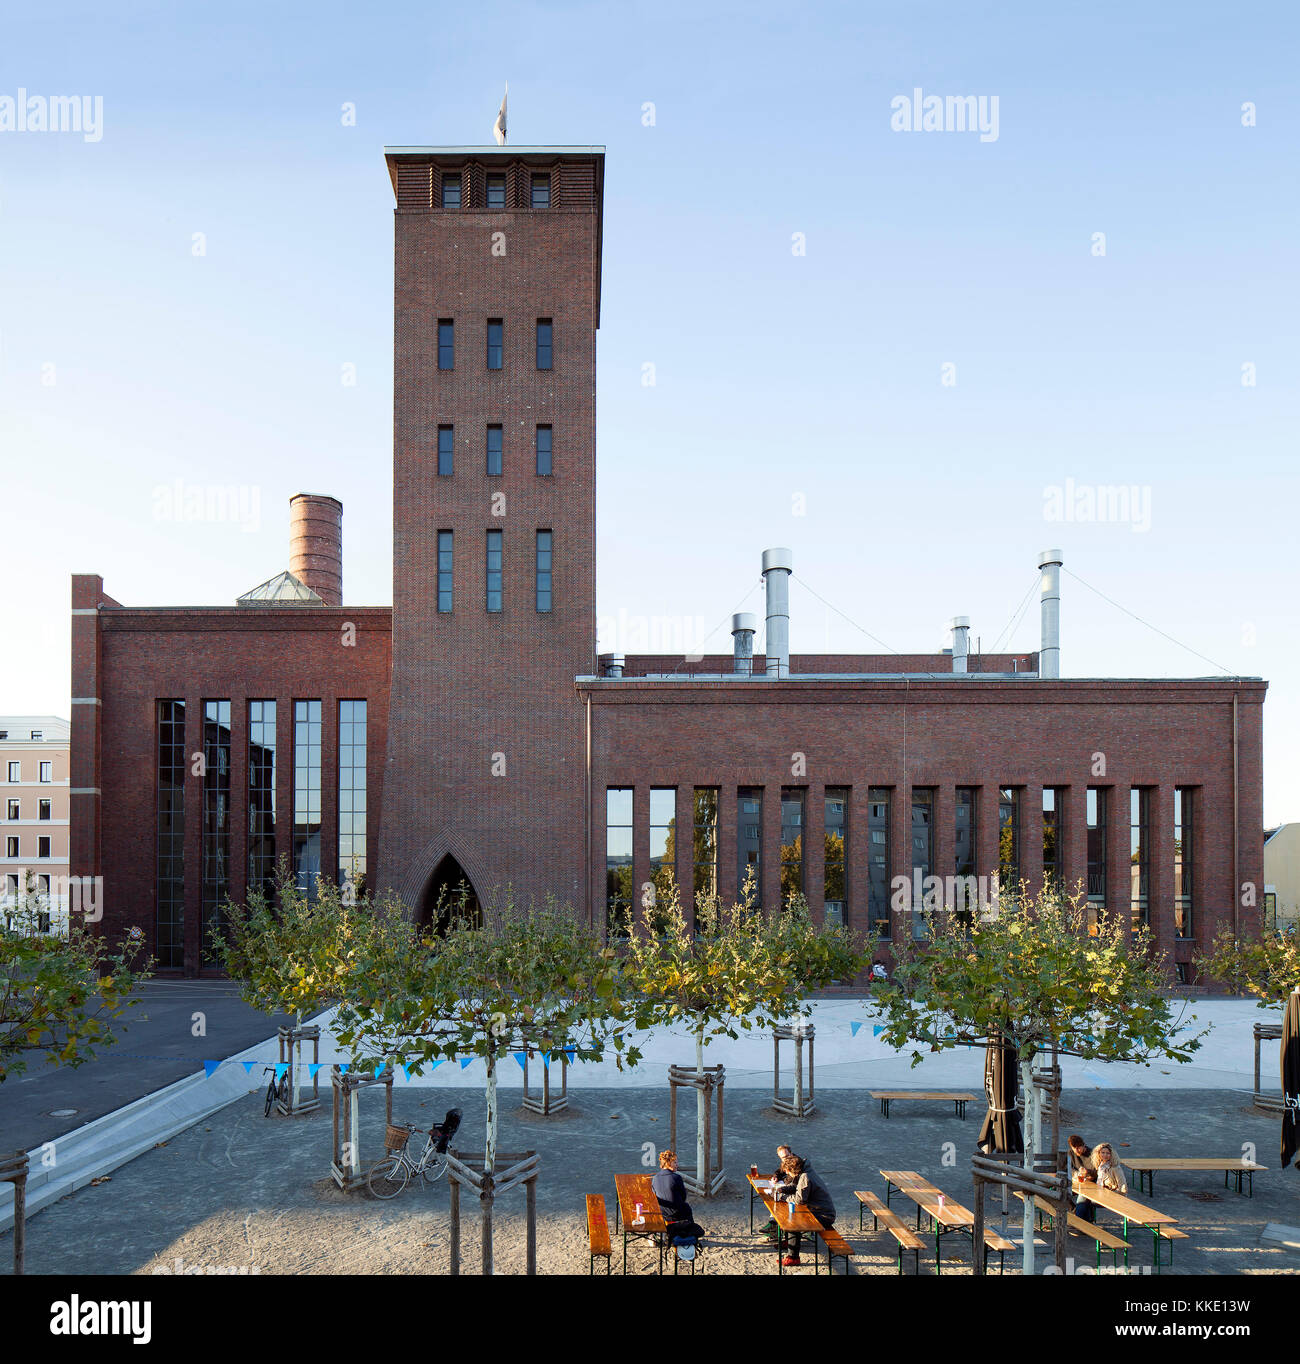 South elevation with beer garden in the foreground. Kindl Centre For Contemporary Art, Berlin, Germany. Architect: grisard'architektur eth sia, 2017. Stock Photo